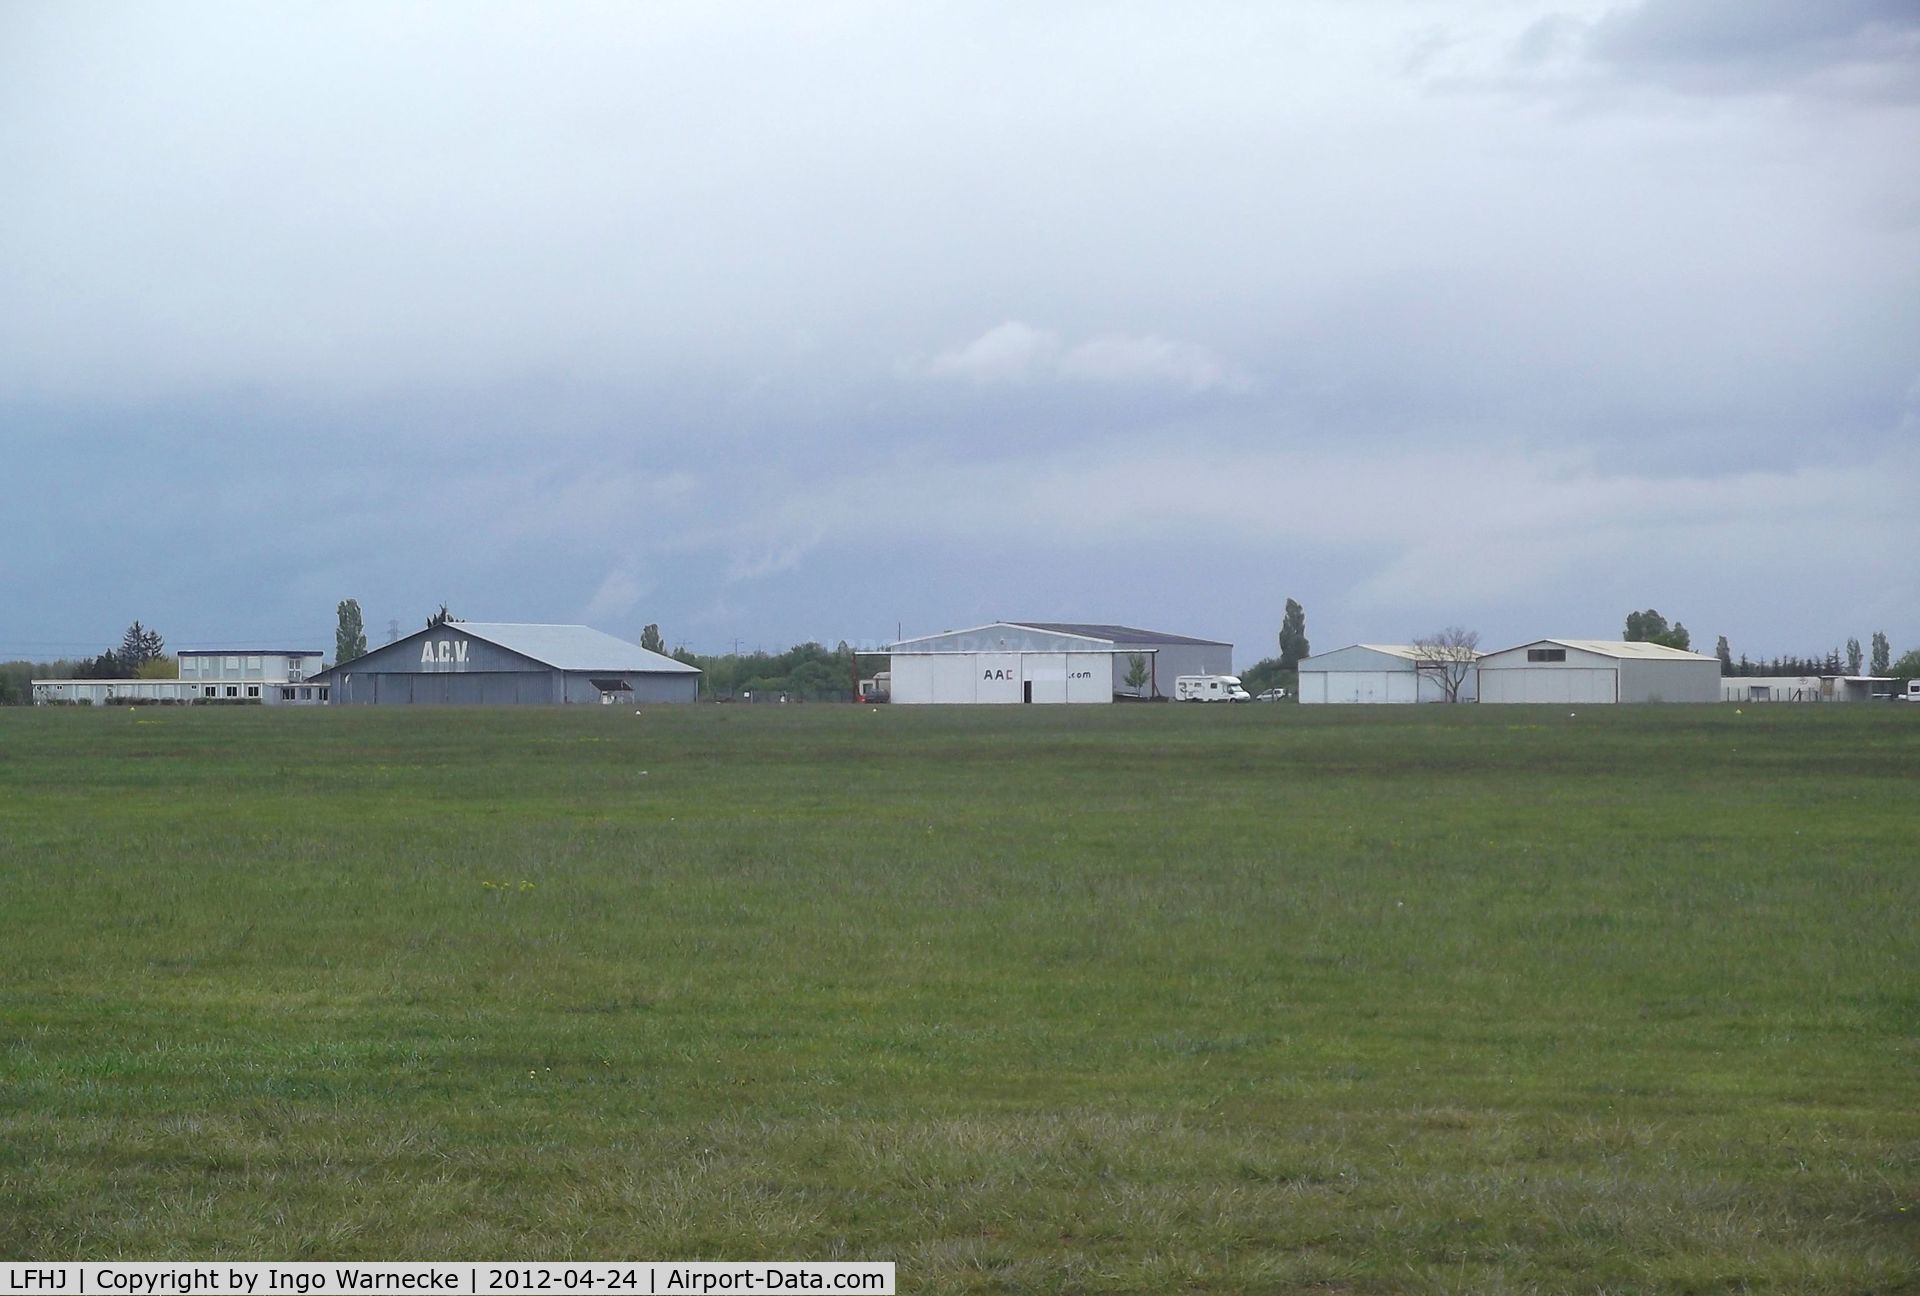 Lyon Corbas Airport, Lyon France (LFHJ) - hangars across the field from the aviation museum Clement Ader, at the Lyon-Corbas airfield